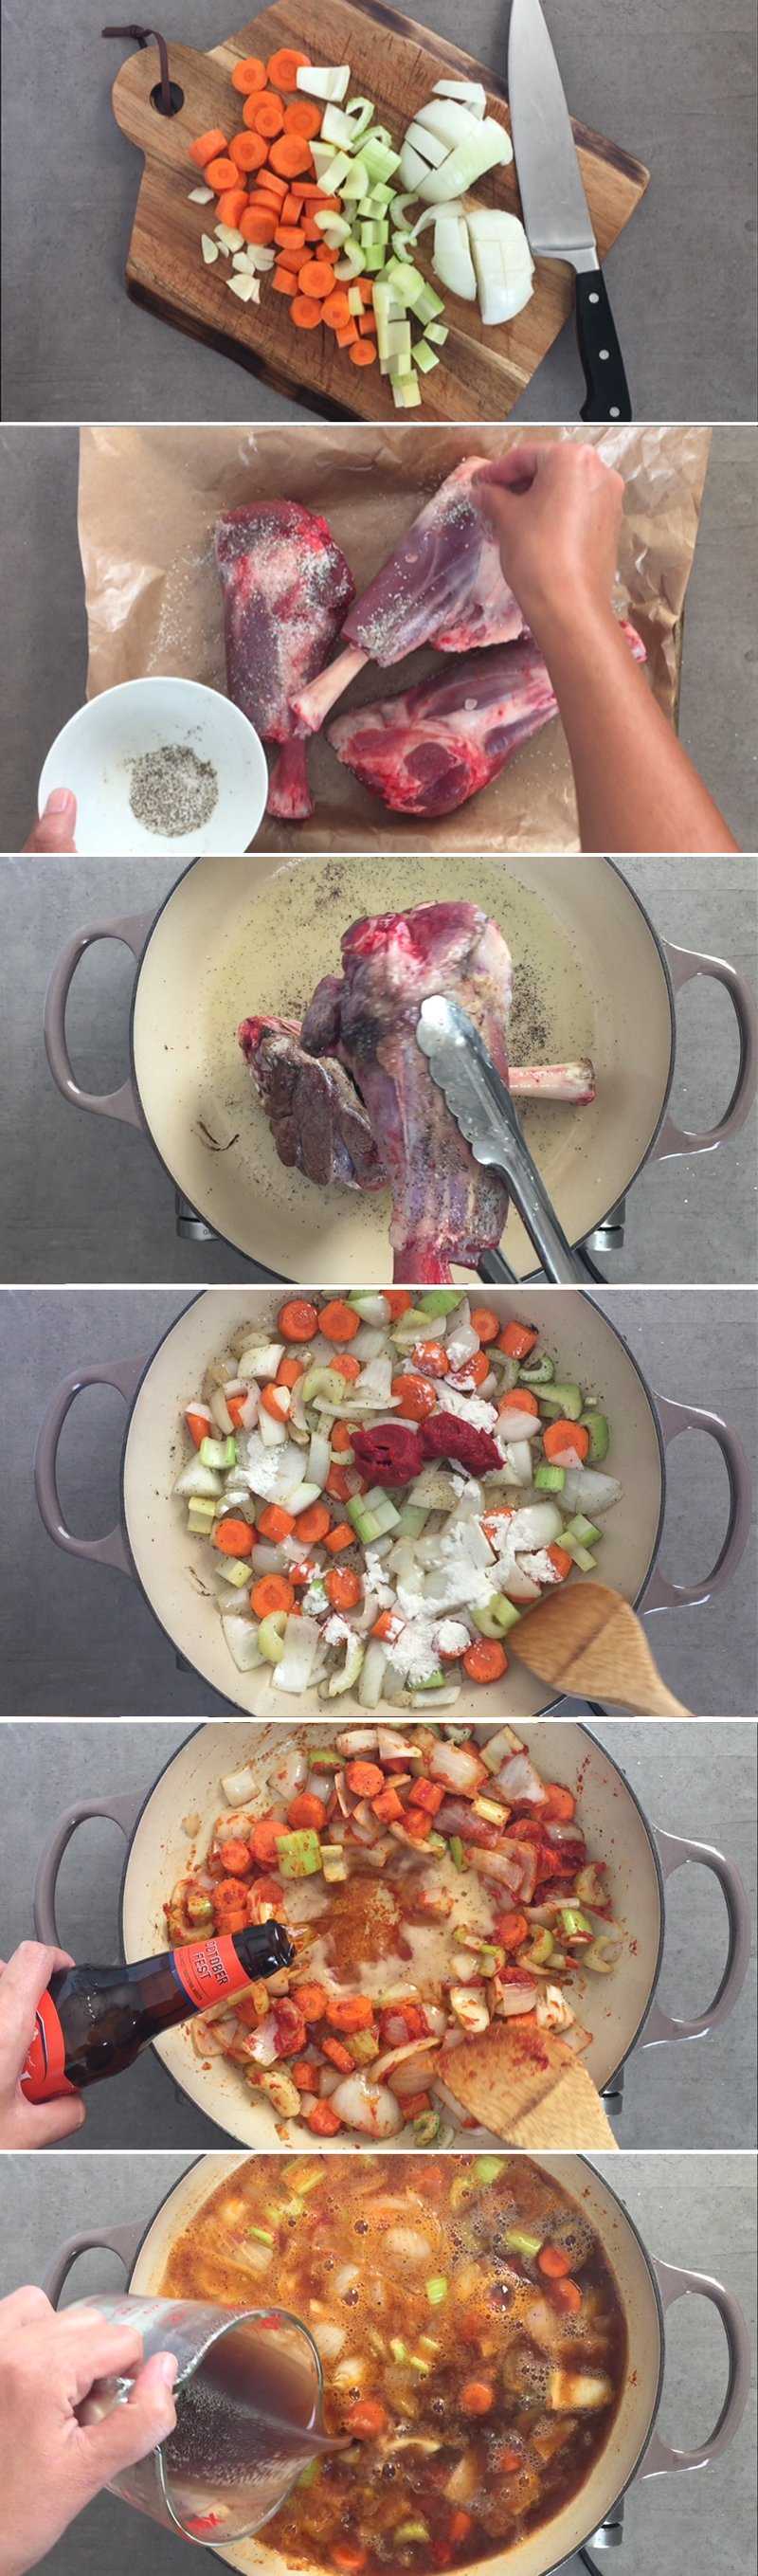 Image sequence illustrating the steps to prepare a lamb shanks for braising and to create the braising liquid.